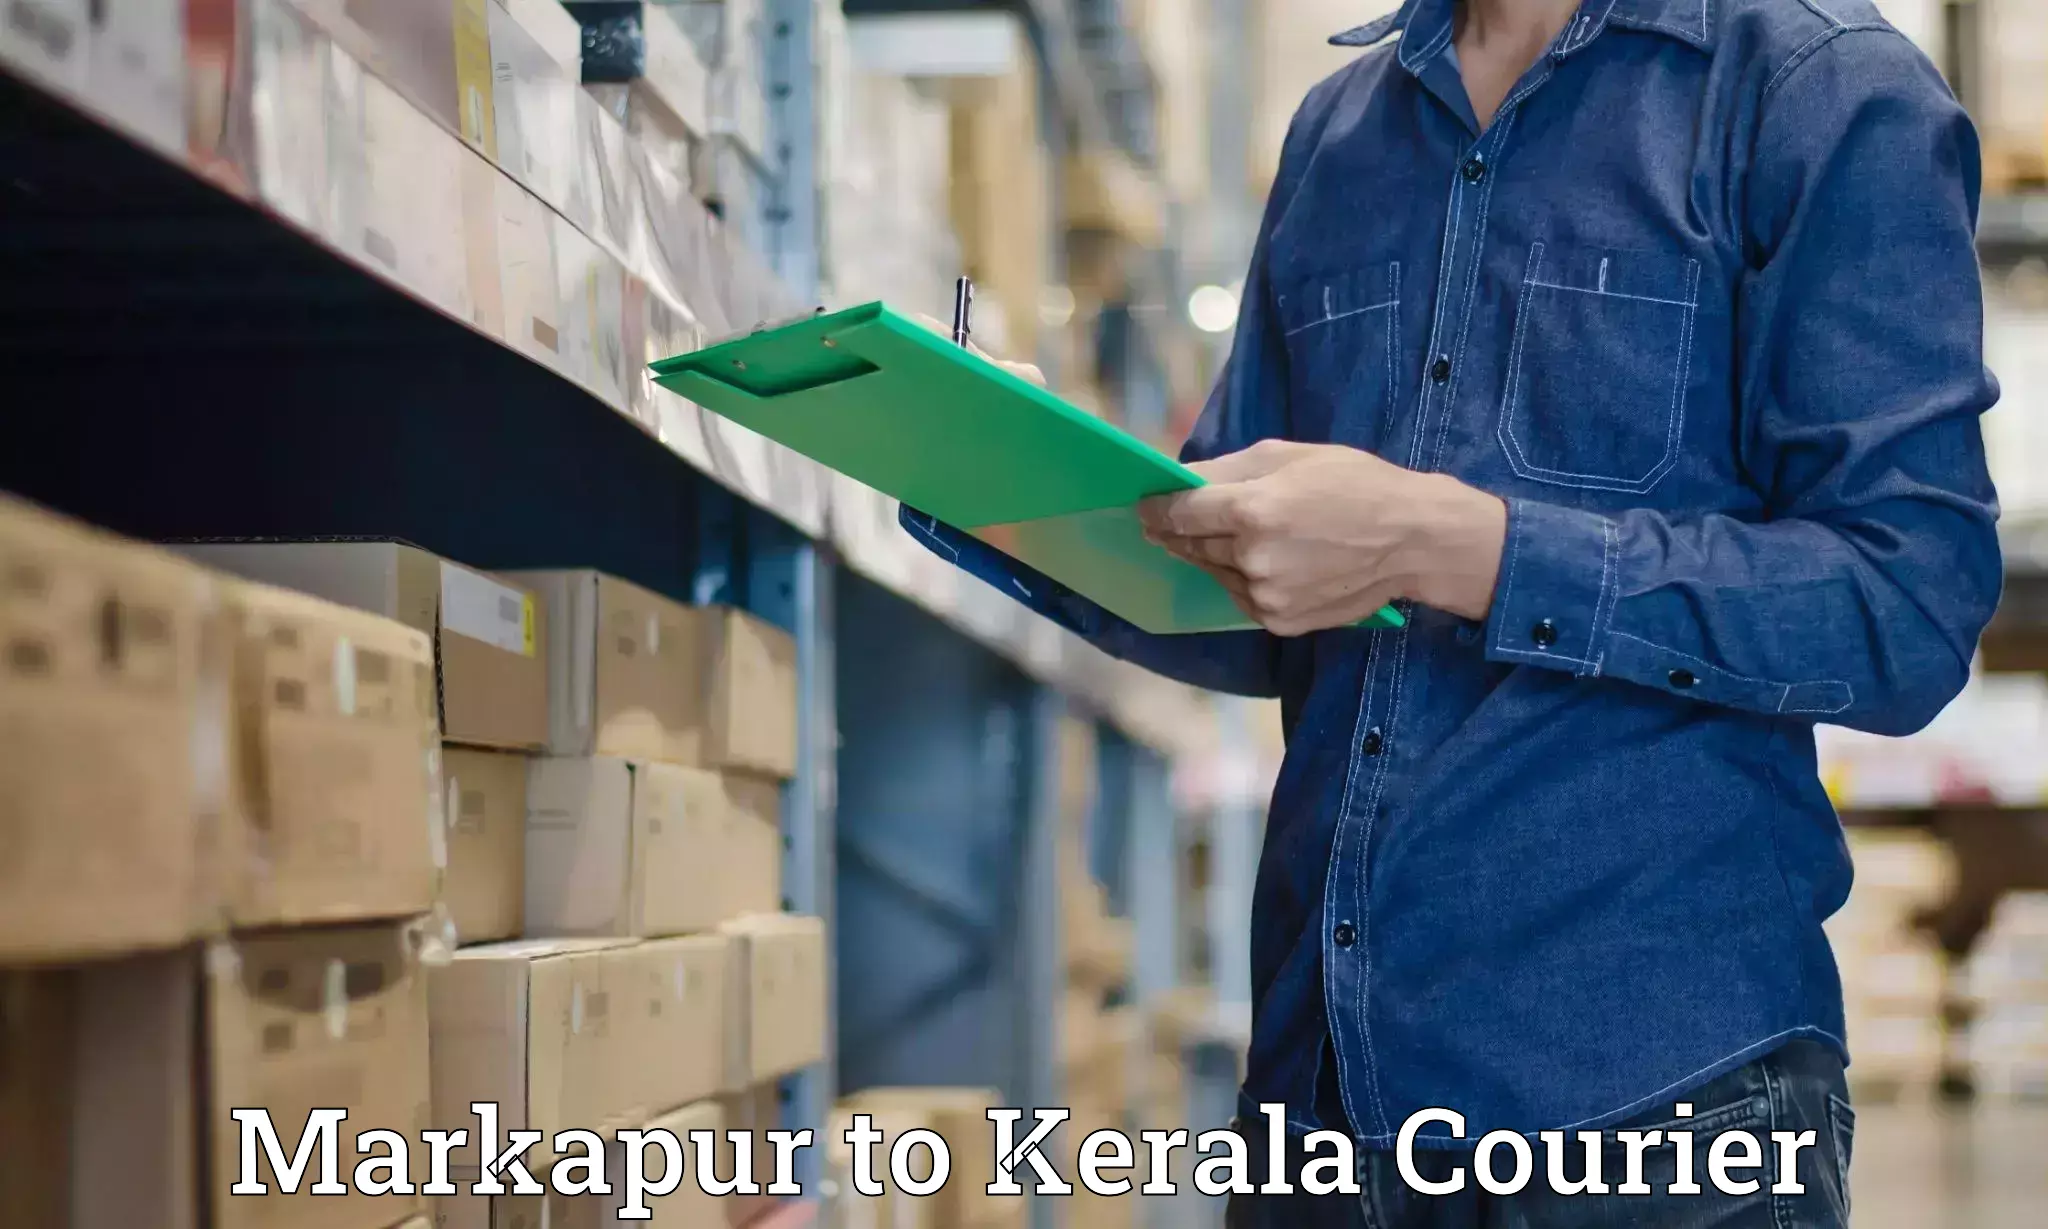 Courier service innovation Markapur to Chengannur